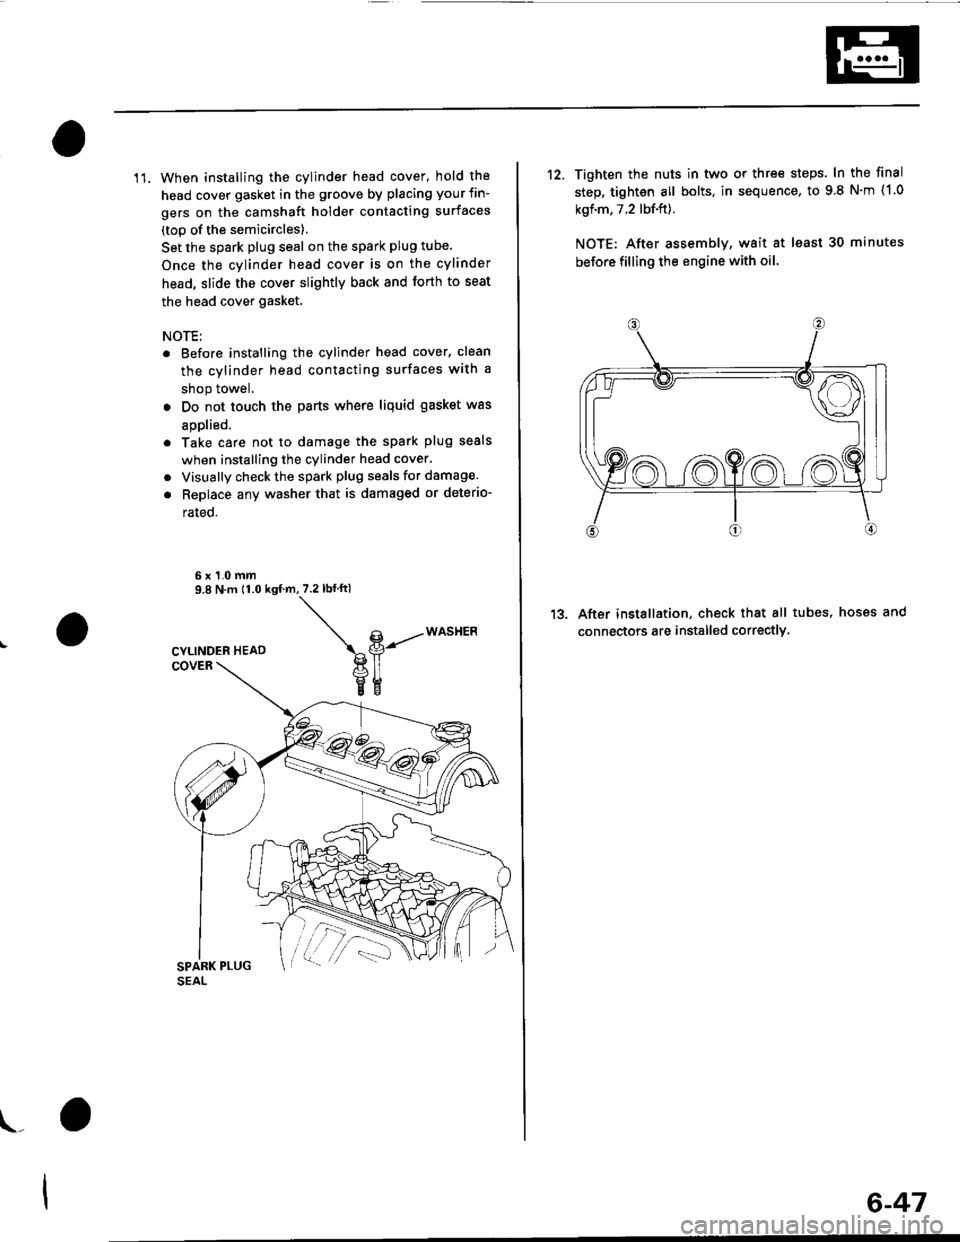 HONDA CIVIC 1998 6.G Service Manual 11. When installing the cylinder head cover, hold the
head cover gasket in the groove by placing your fin-
gers on the camshaft holder contacting surfaces
(top of the semicircles)
Set the spark plug s